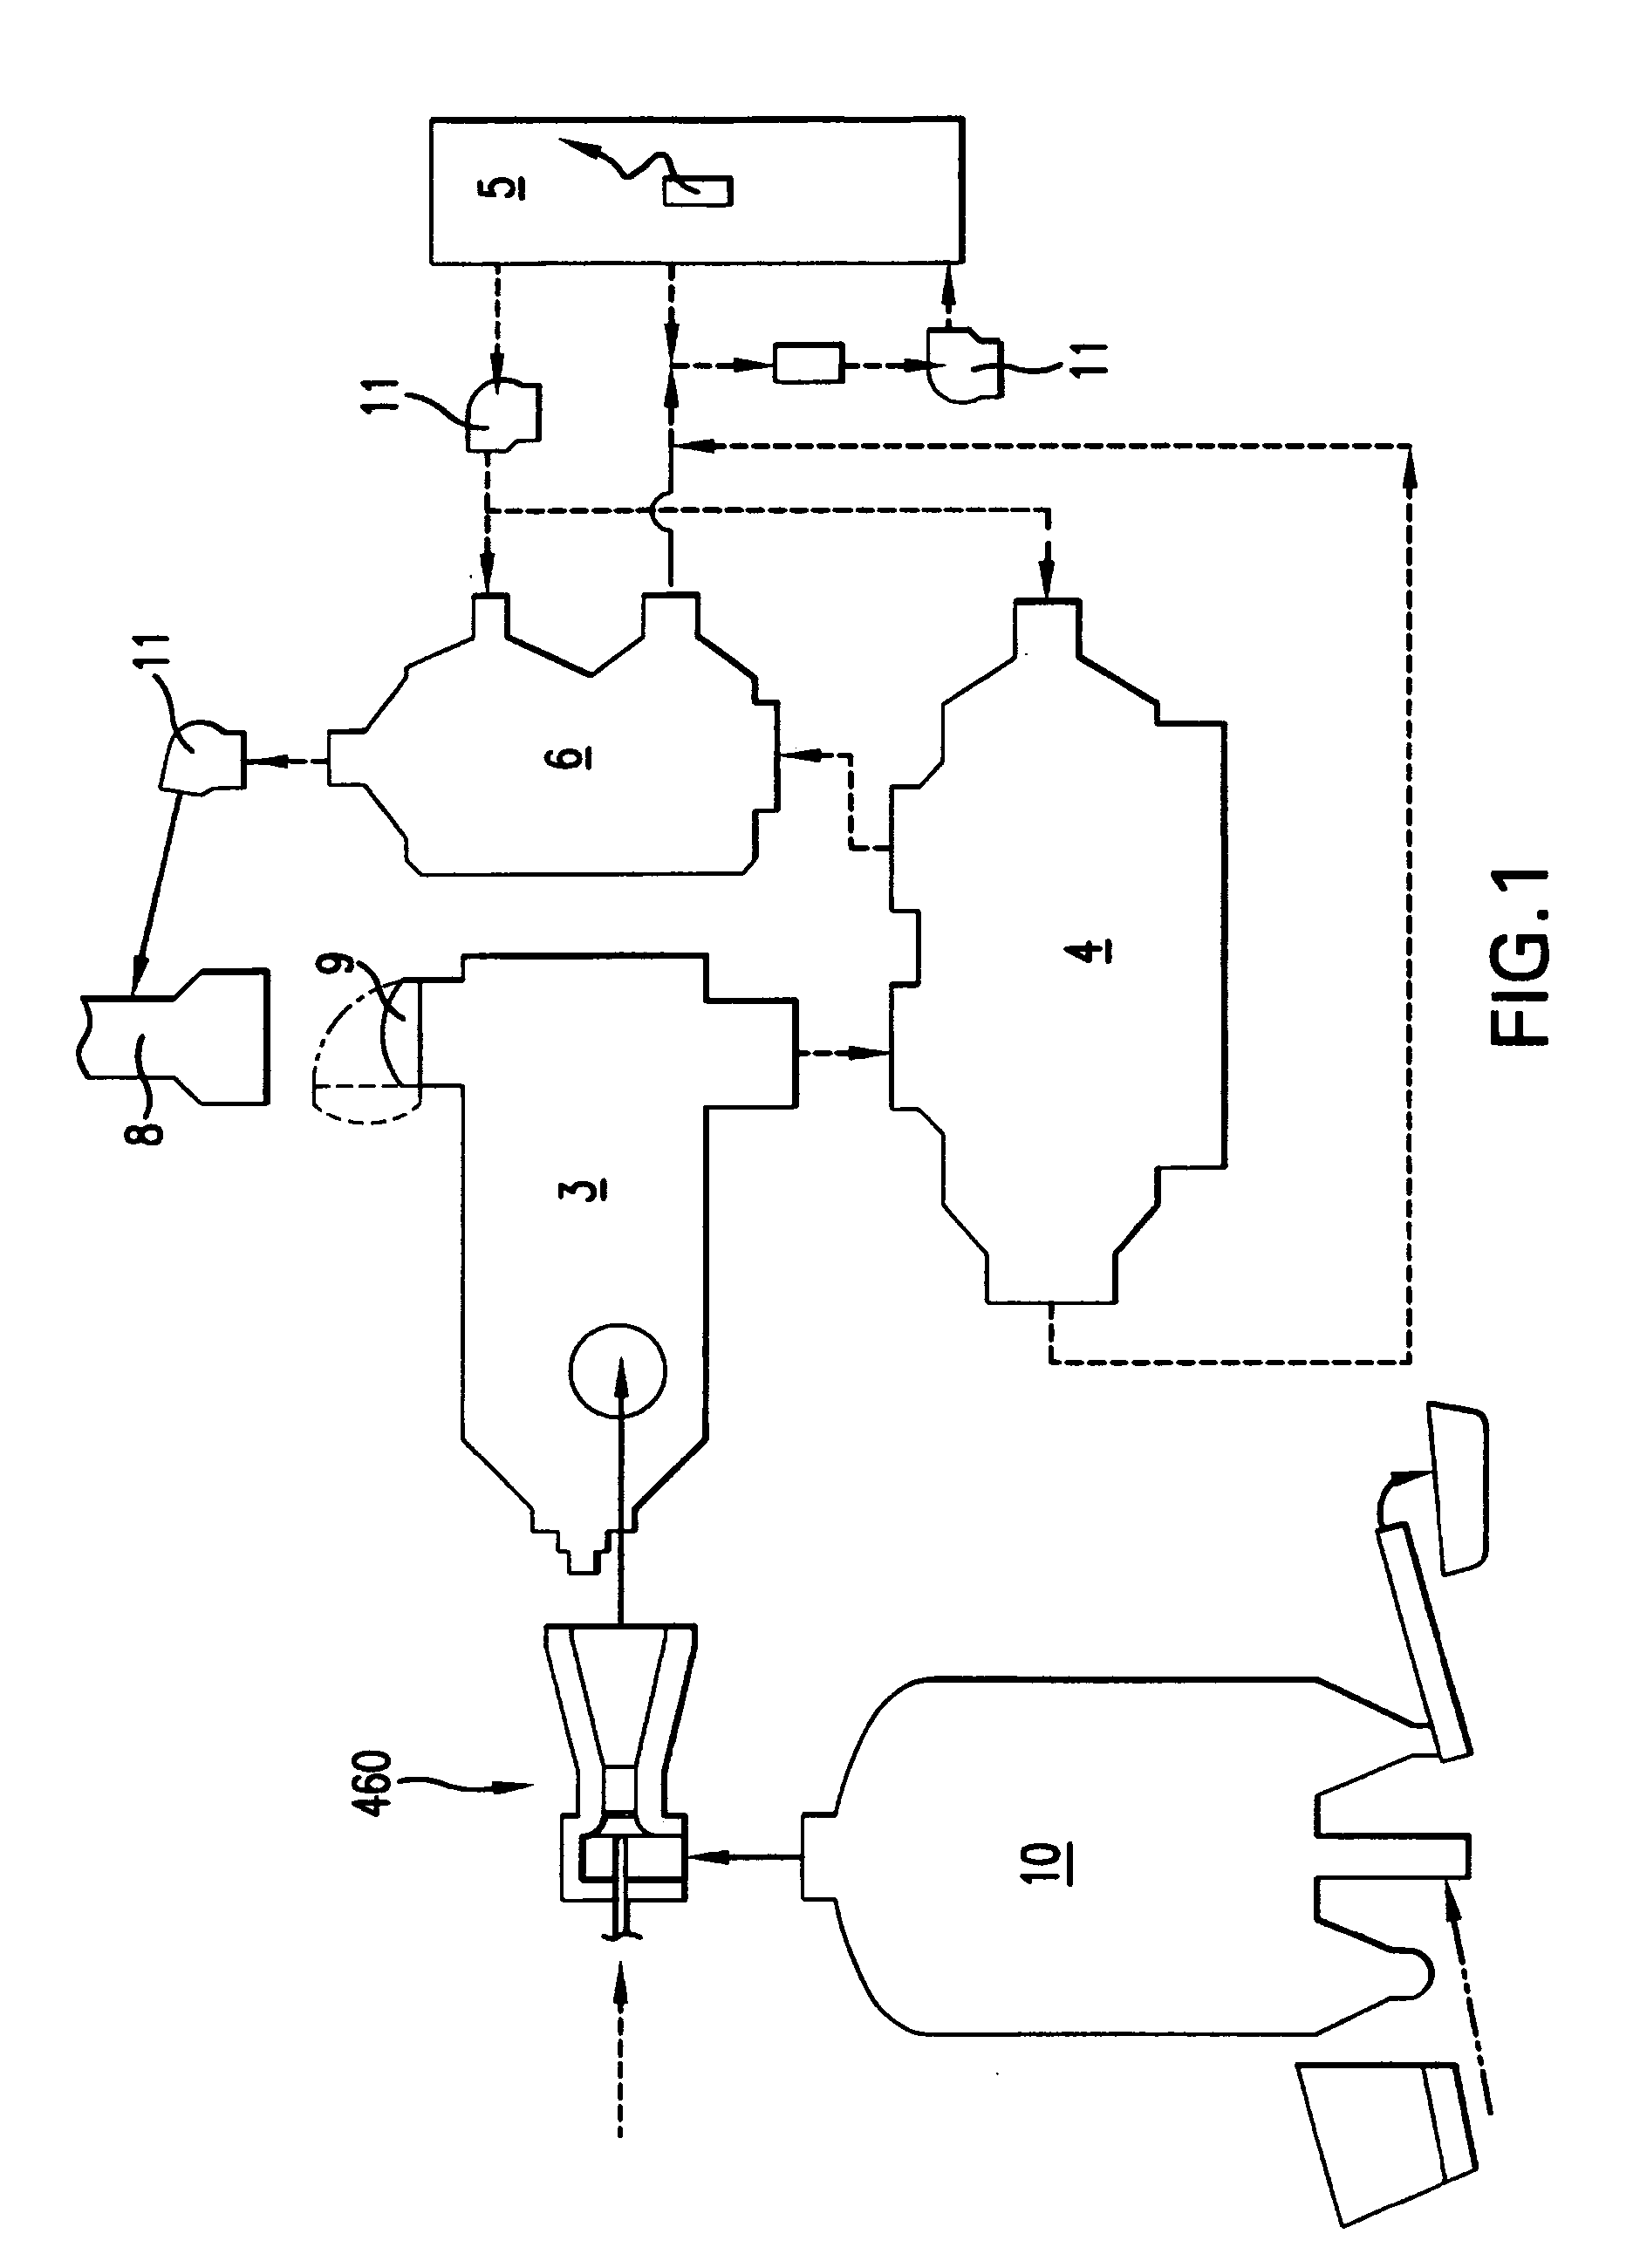 Pyrolyzing gasification system and method of use